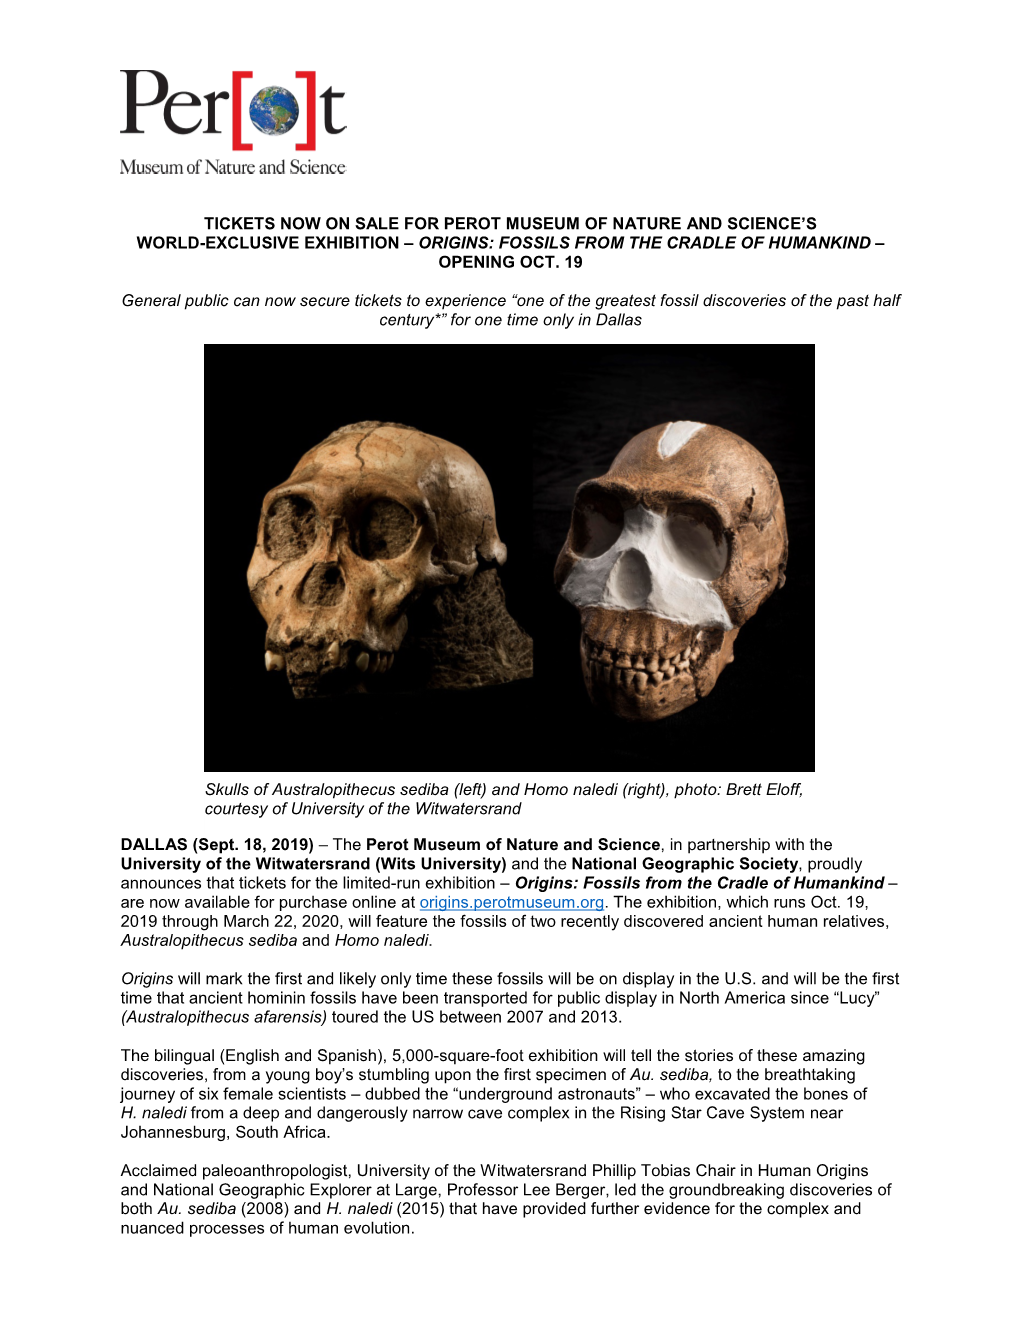 Origins: Fossils from the Cradle of Humankind – Opening Oct